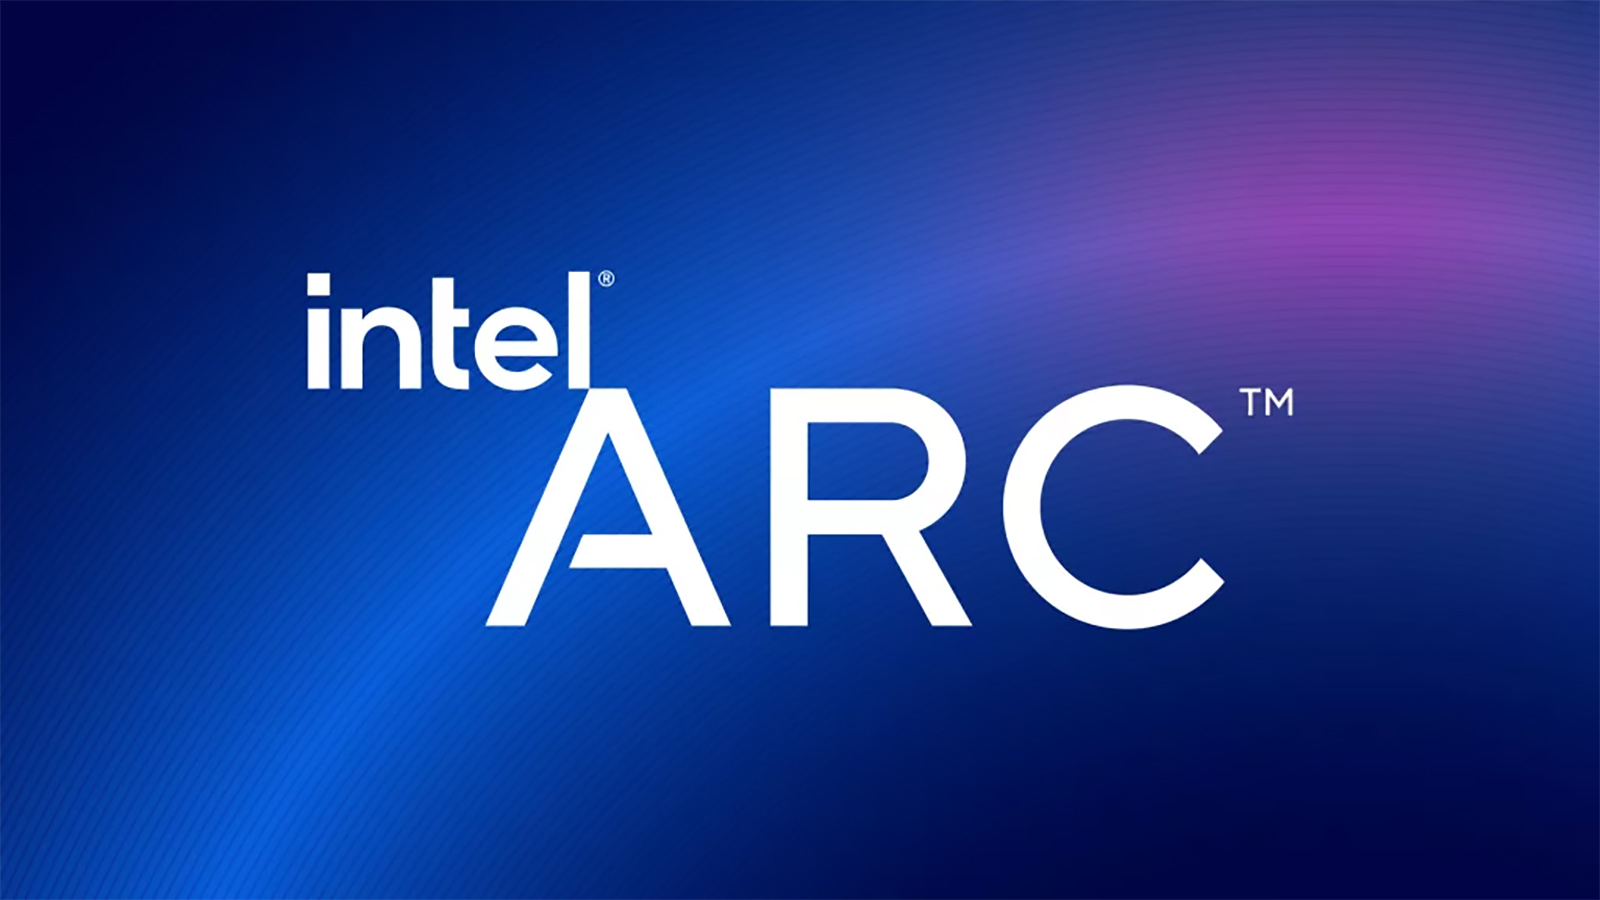 The Intel Arc logo against a blue and purple backdrop